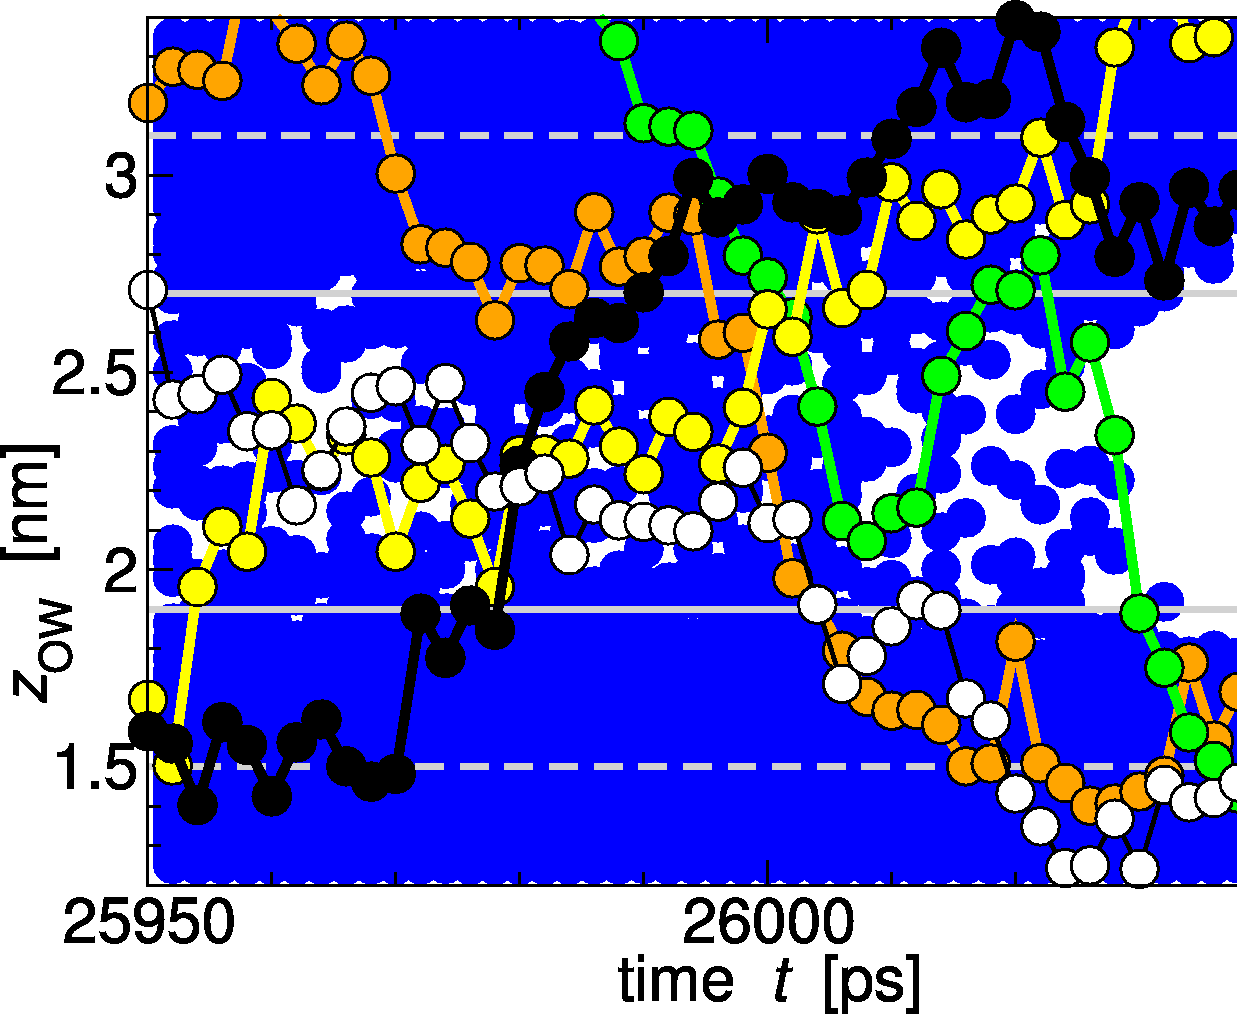 [graph: water trajectories in
the pore region over 100ps]